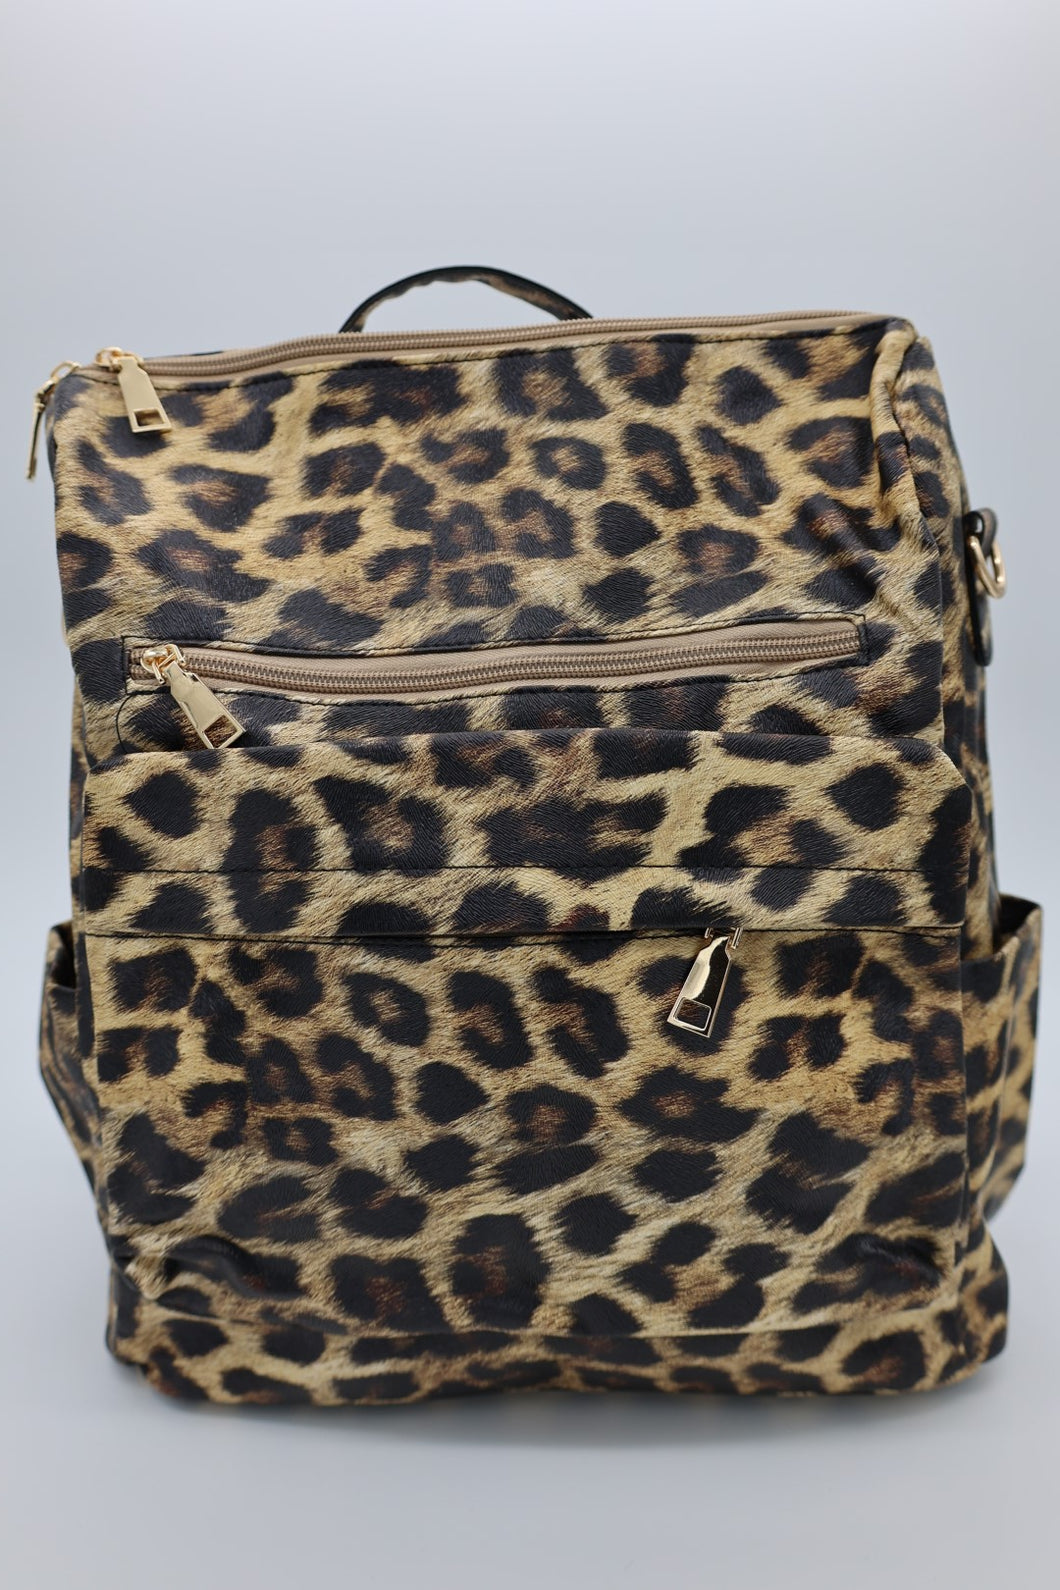 Safari Time Leopard Backpack by LuvLeigh Apparel